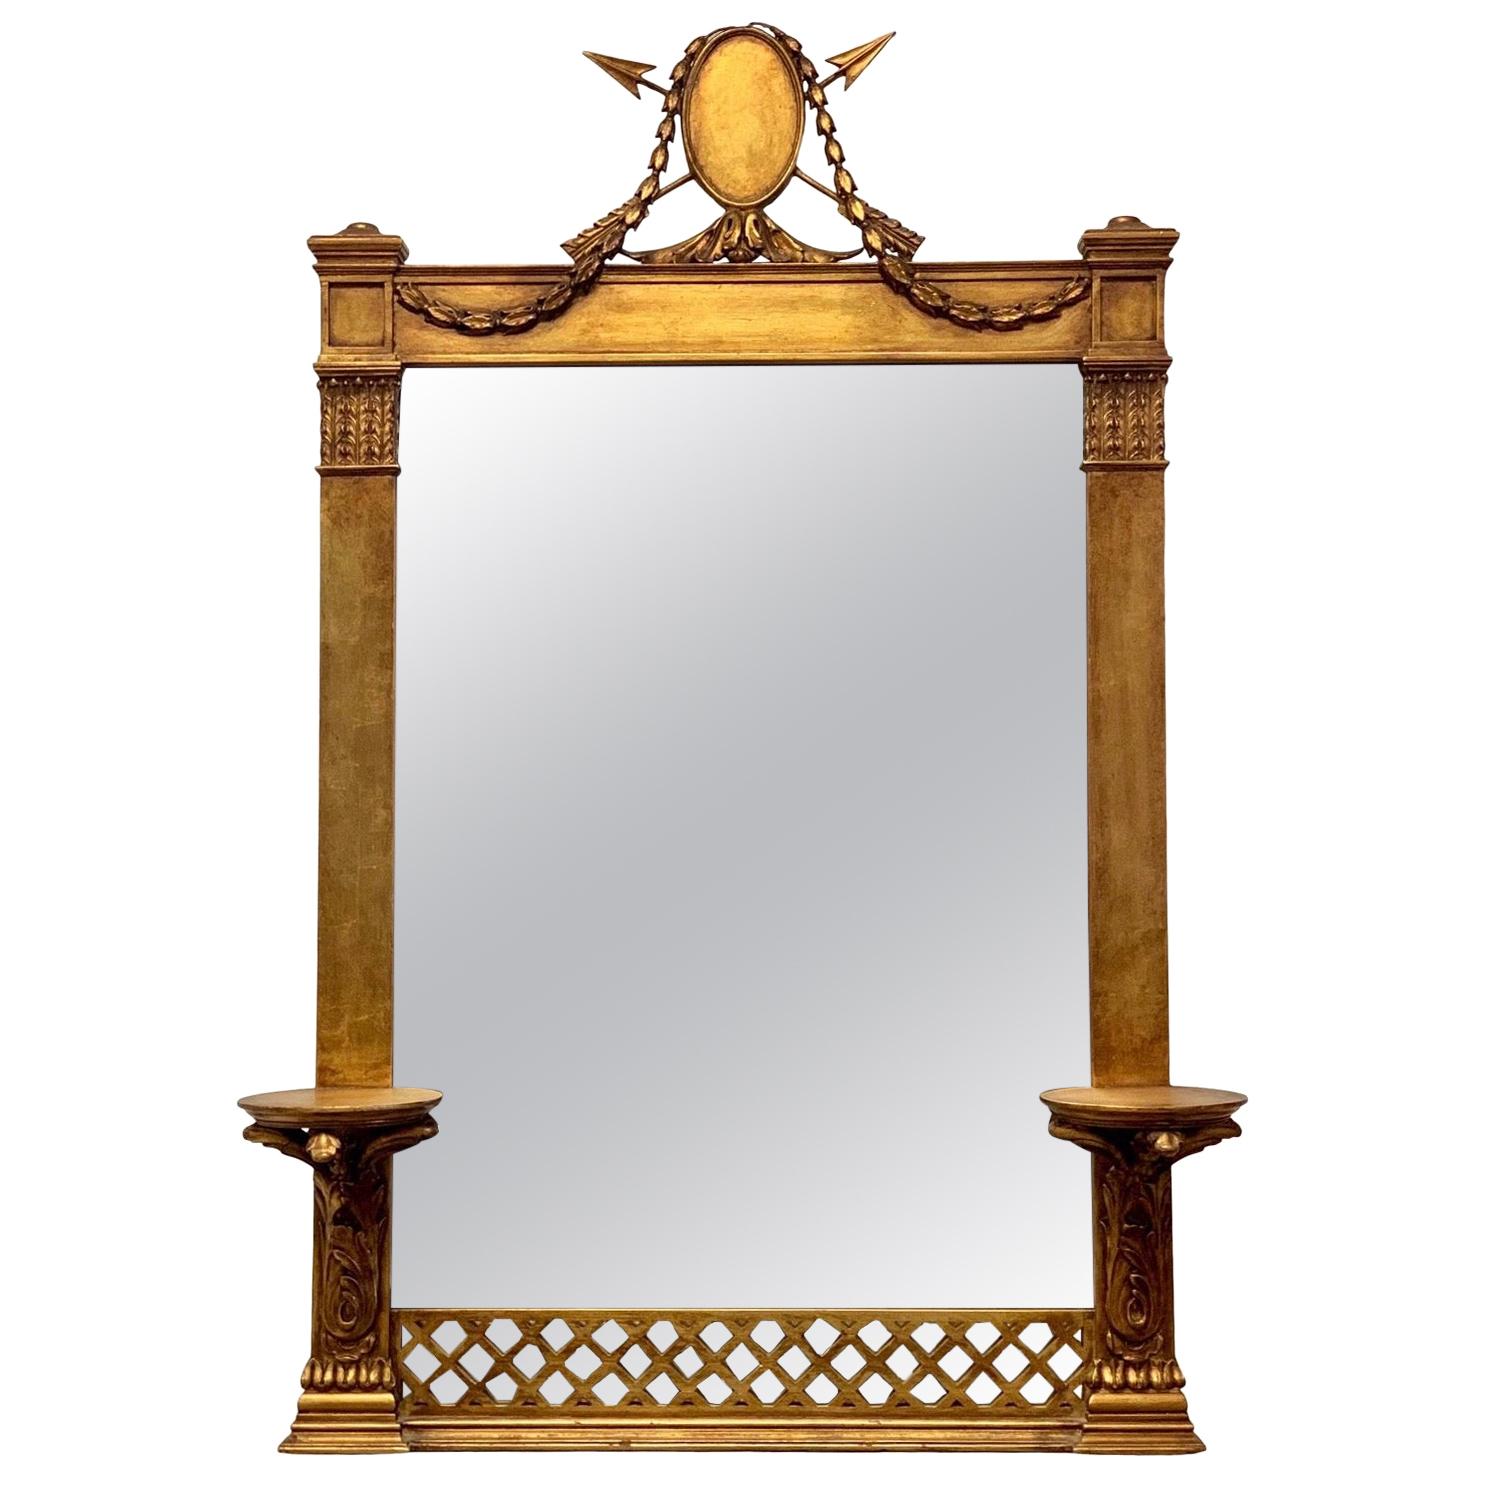 Nineteenth Century Giltwood Carved Italian Mirror with Wall Bracket Sconces